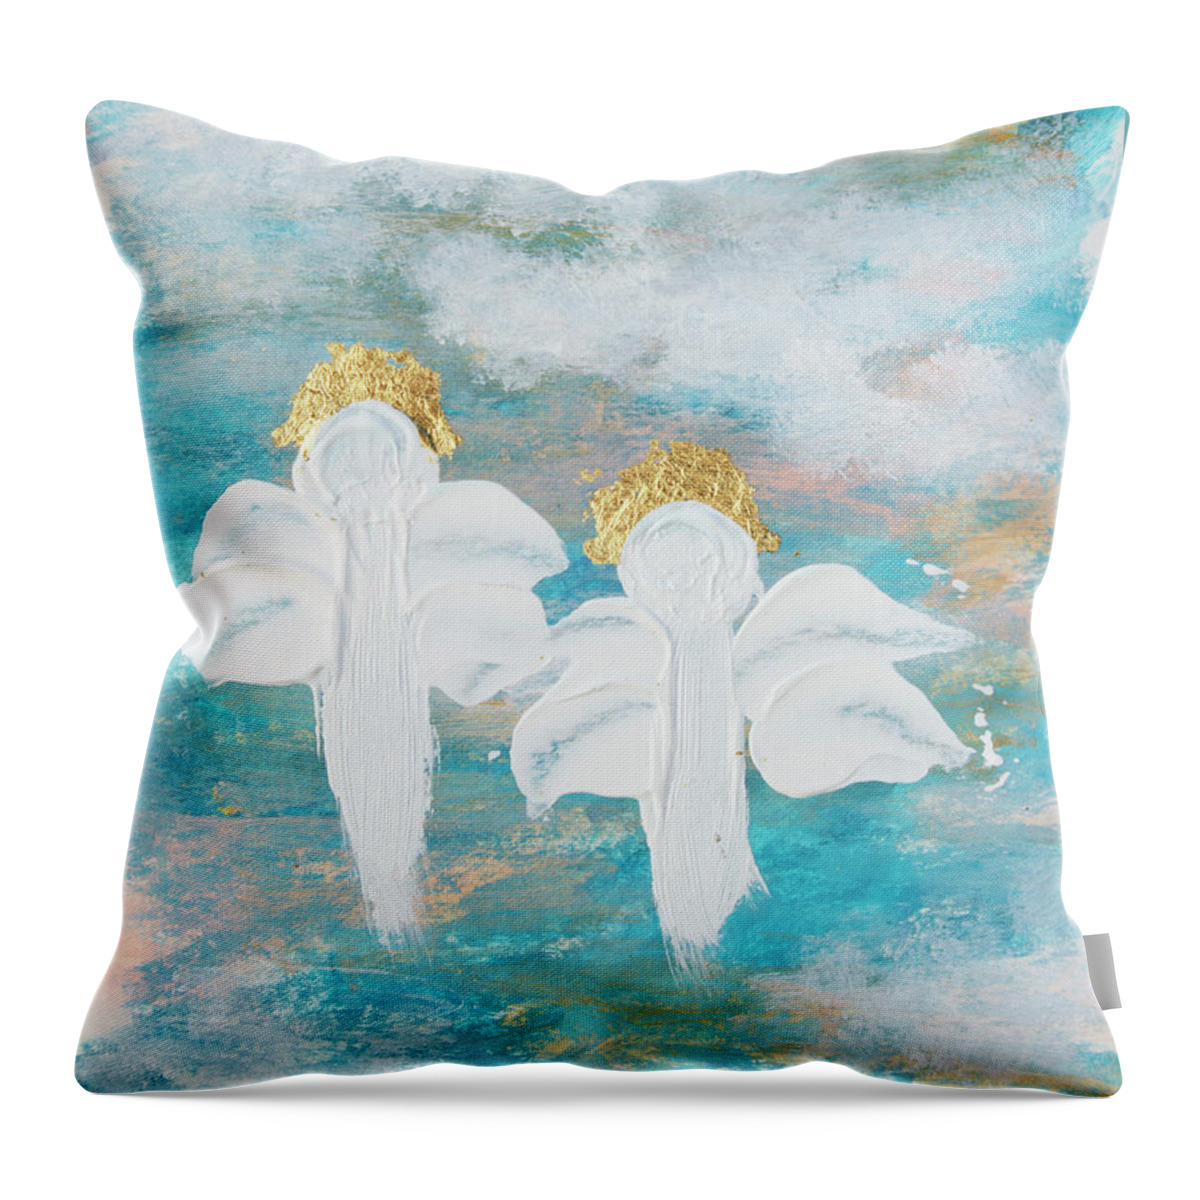 Acrylic Throw Pillow featuring the painting Blue Angel Friends 2 by Linh Nguyen-Ng